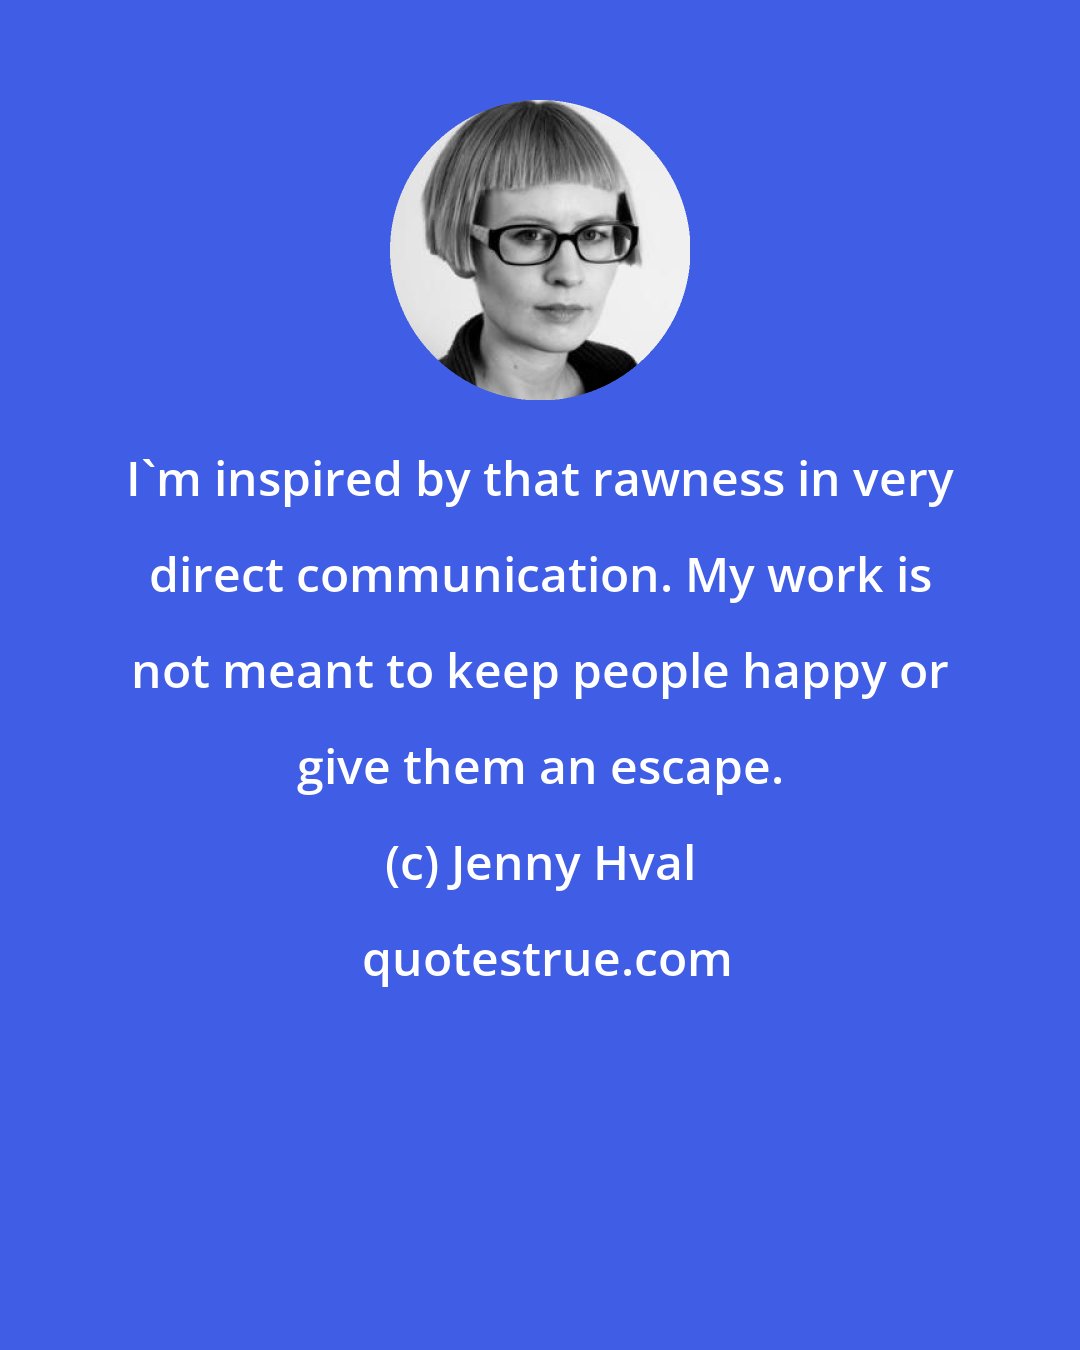 Jenny Hval: I'm inspired by that rawness in very direct communication. My work is not meant to keep people happy or give them an escape.